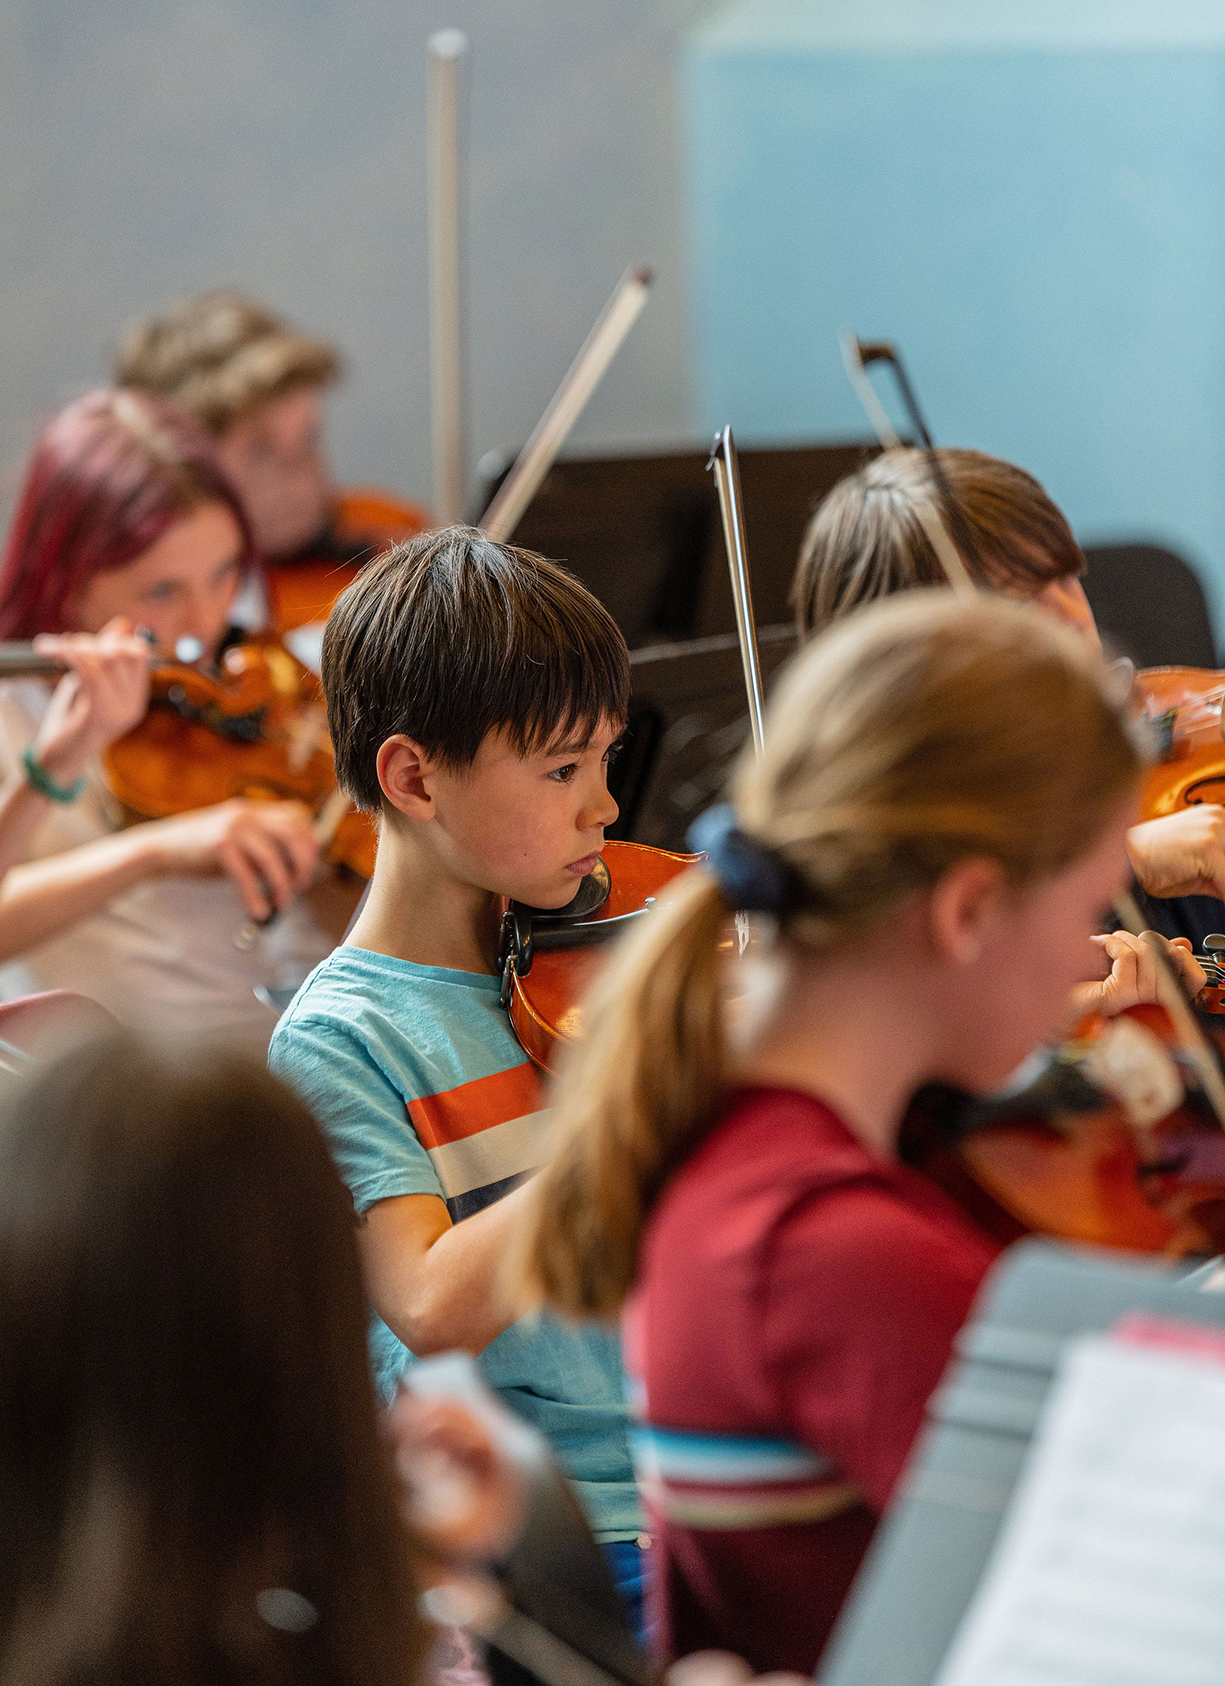 Middle school students in strings class; focus is on a young boy wearing a blue shirt and playing the violin